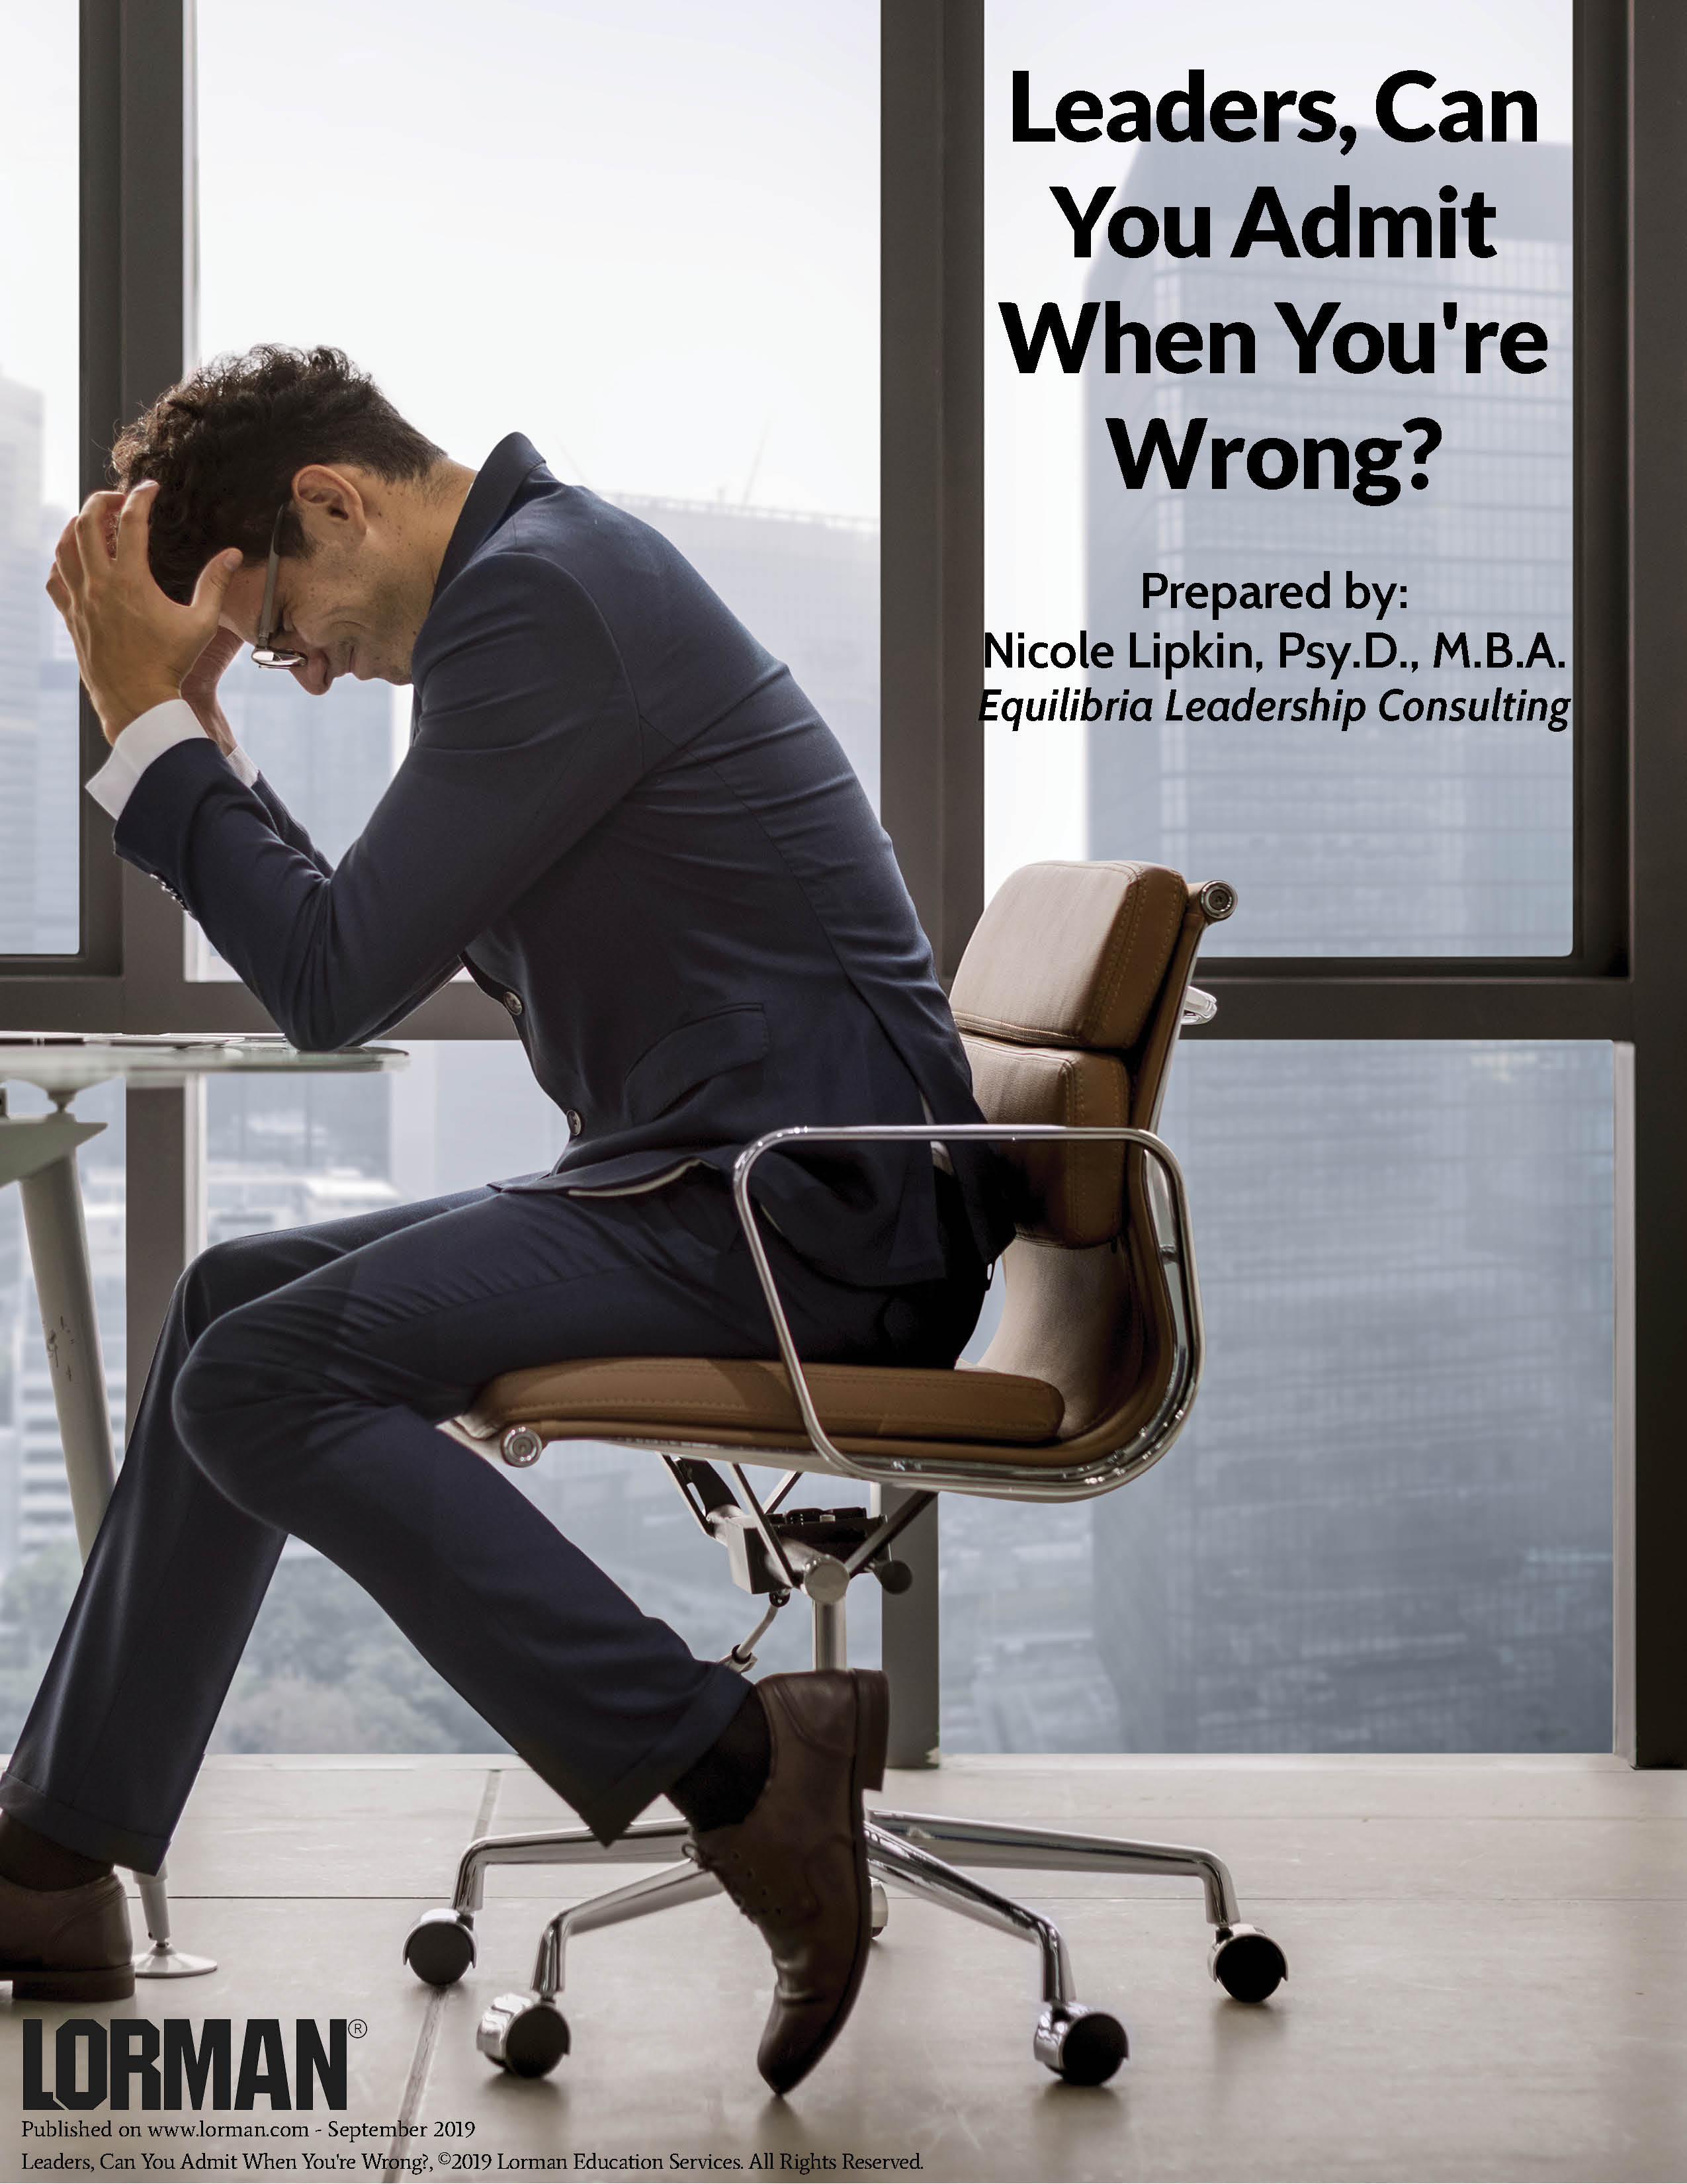 Leaders, Can You Admit When You're Wrong?